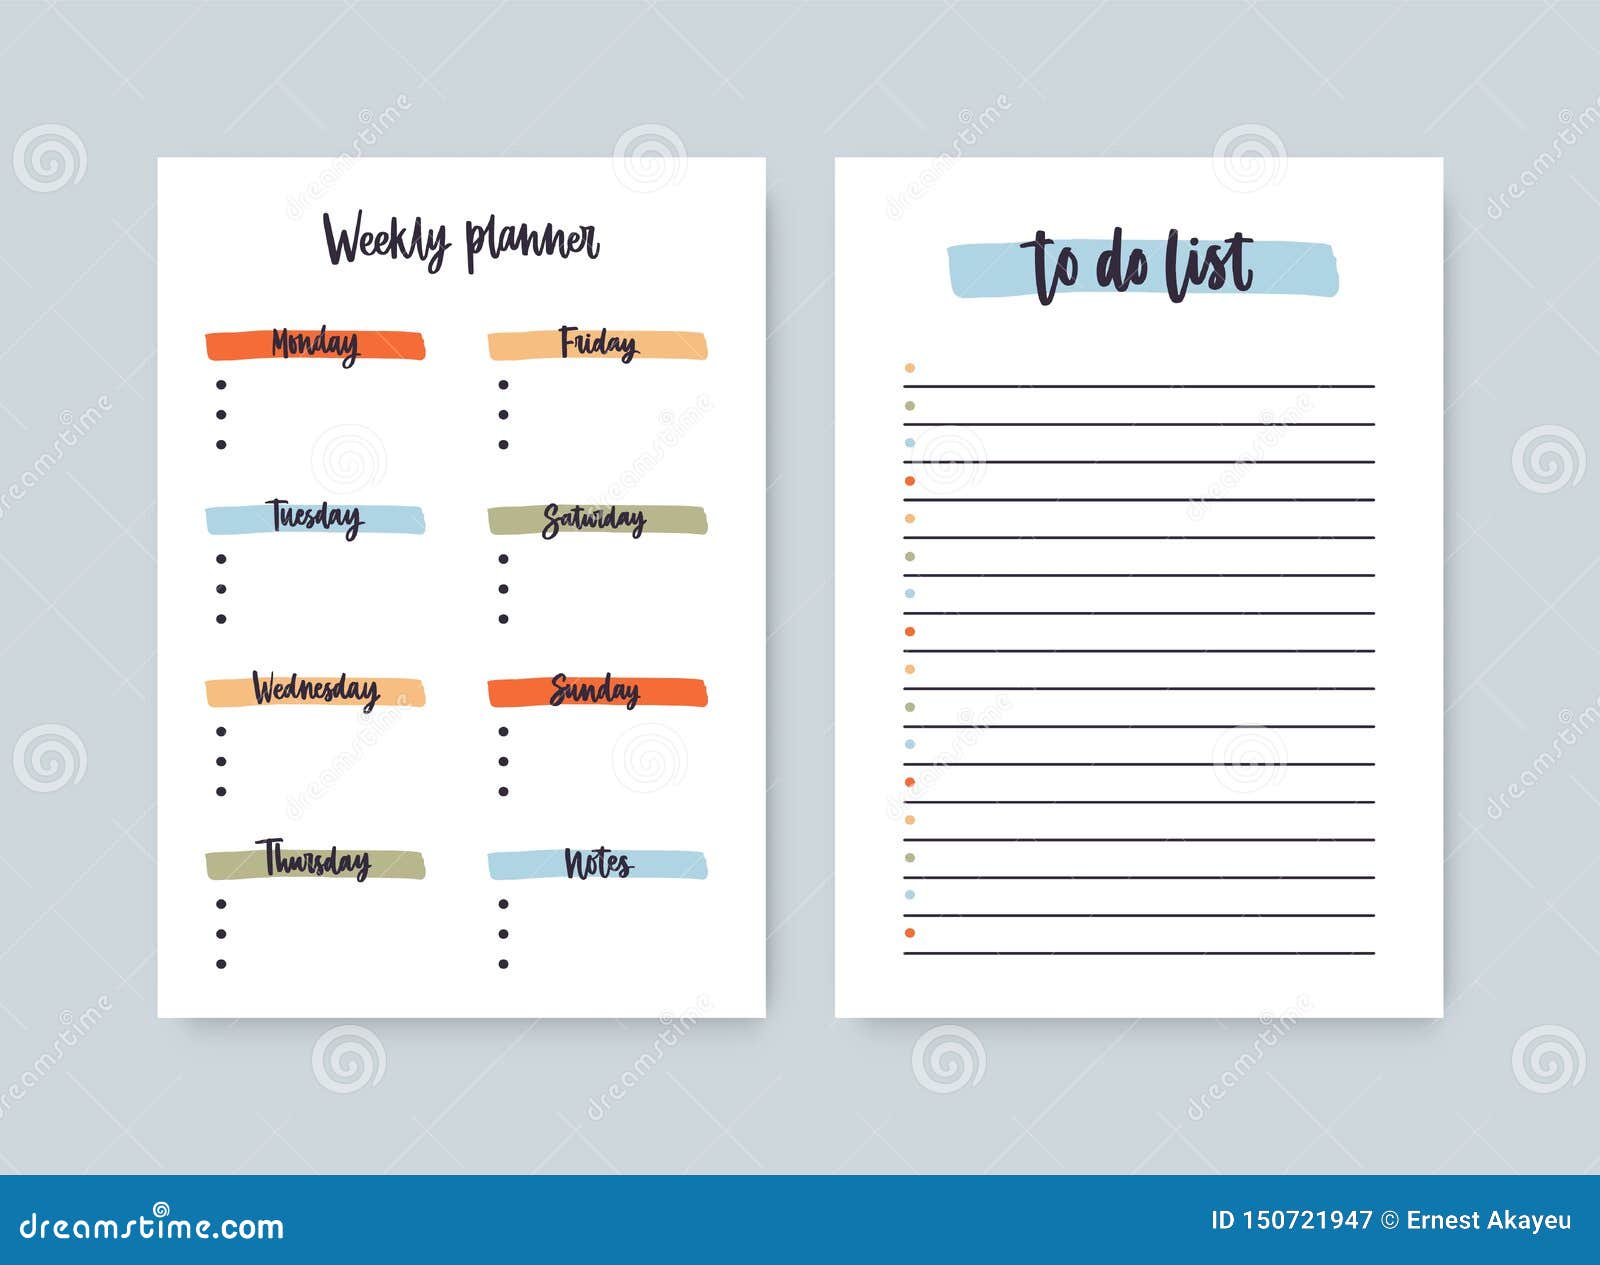 bundle of weekly planner and to-do-list templates with headings highlighted by brushstrokes. printable daily plan